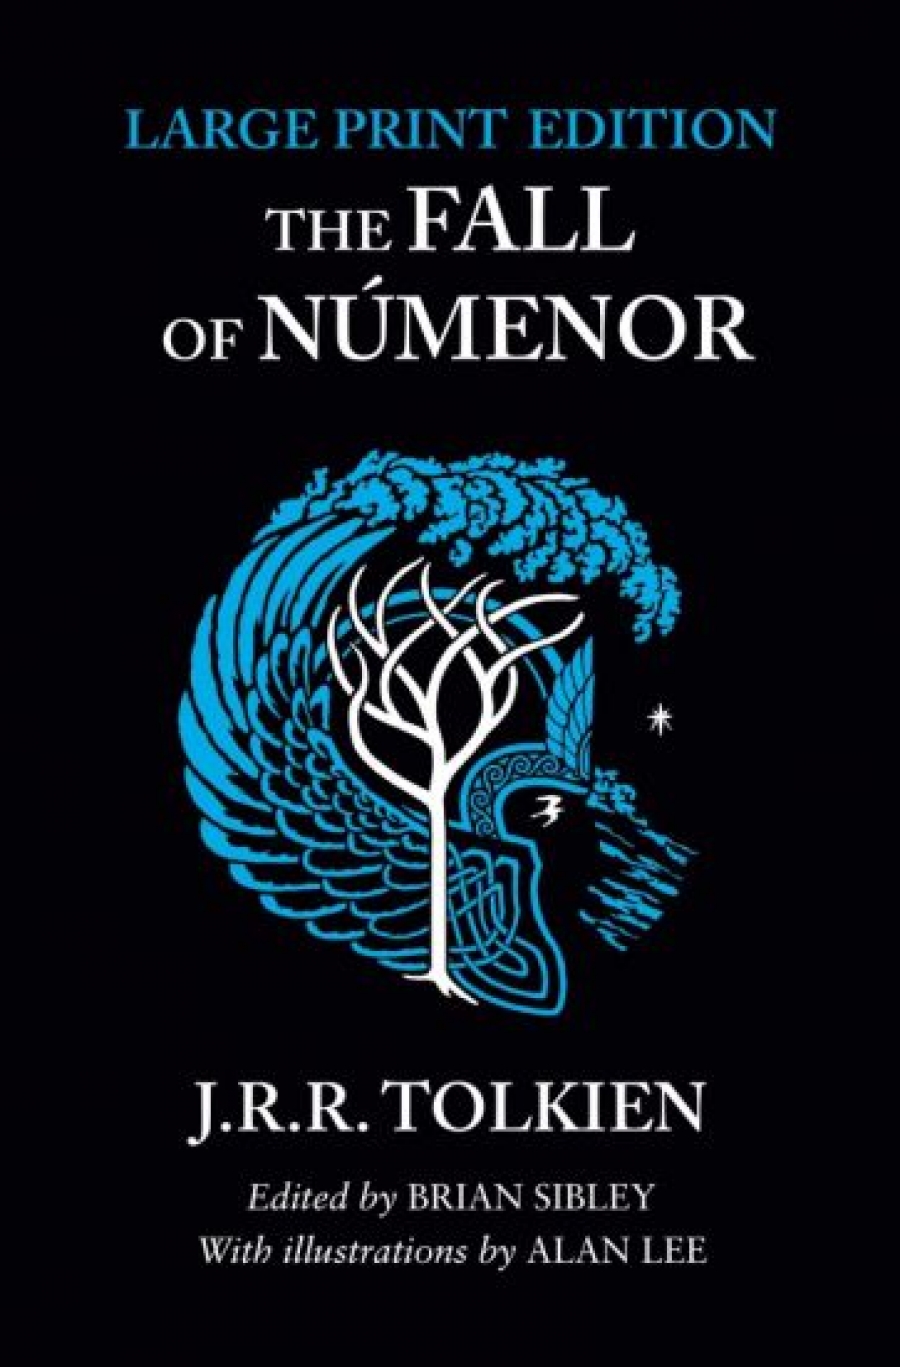 Tolkien John Ronald Reuel The Fall of Numenor and Other Tales from the Second Age of Middle-earth 